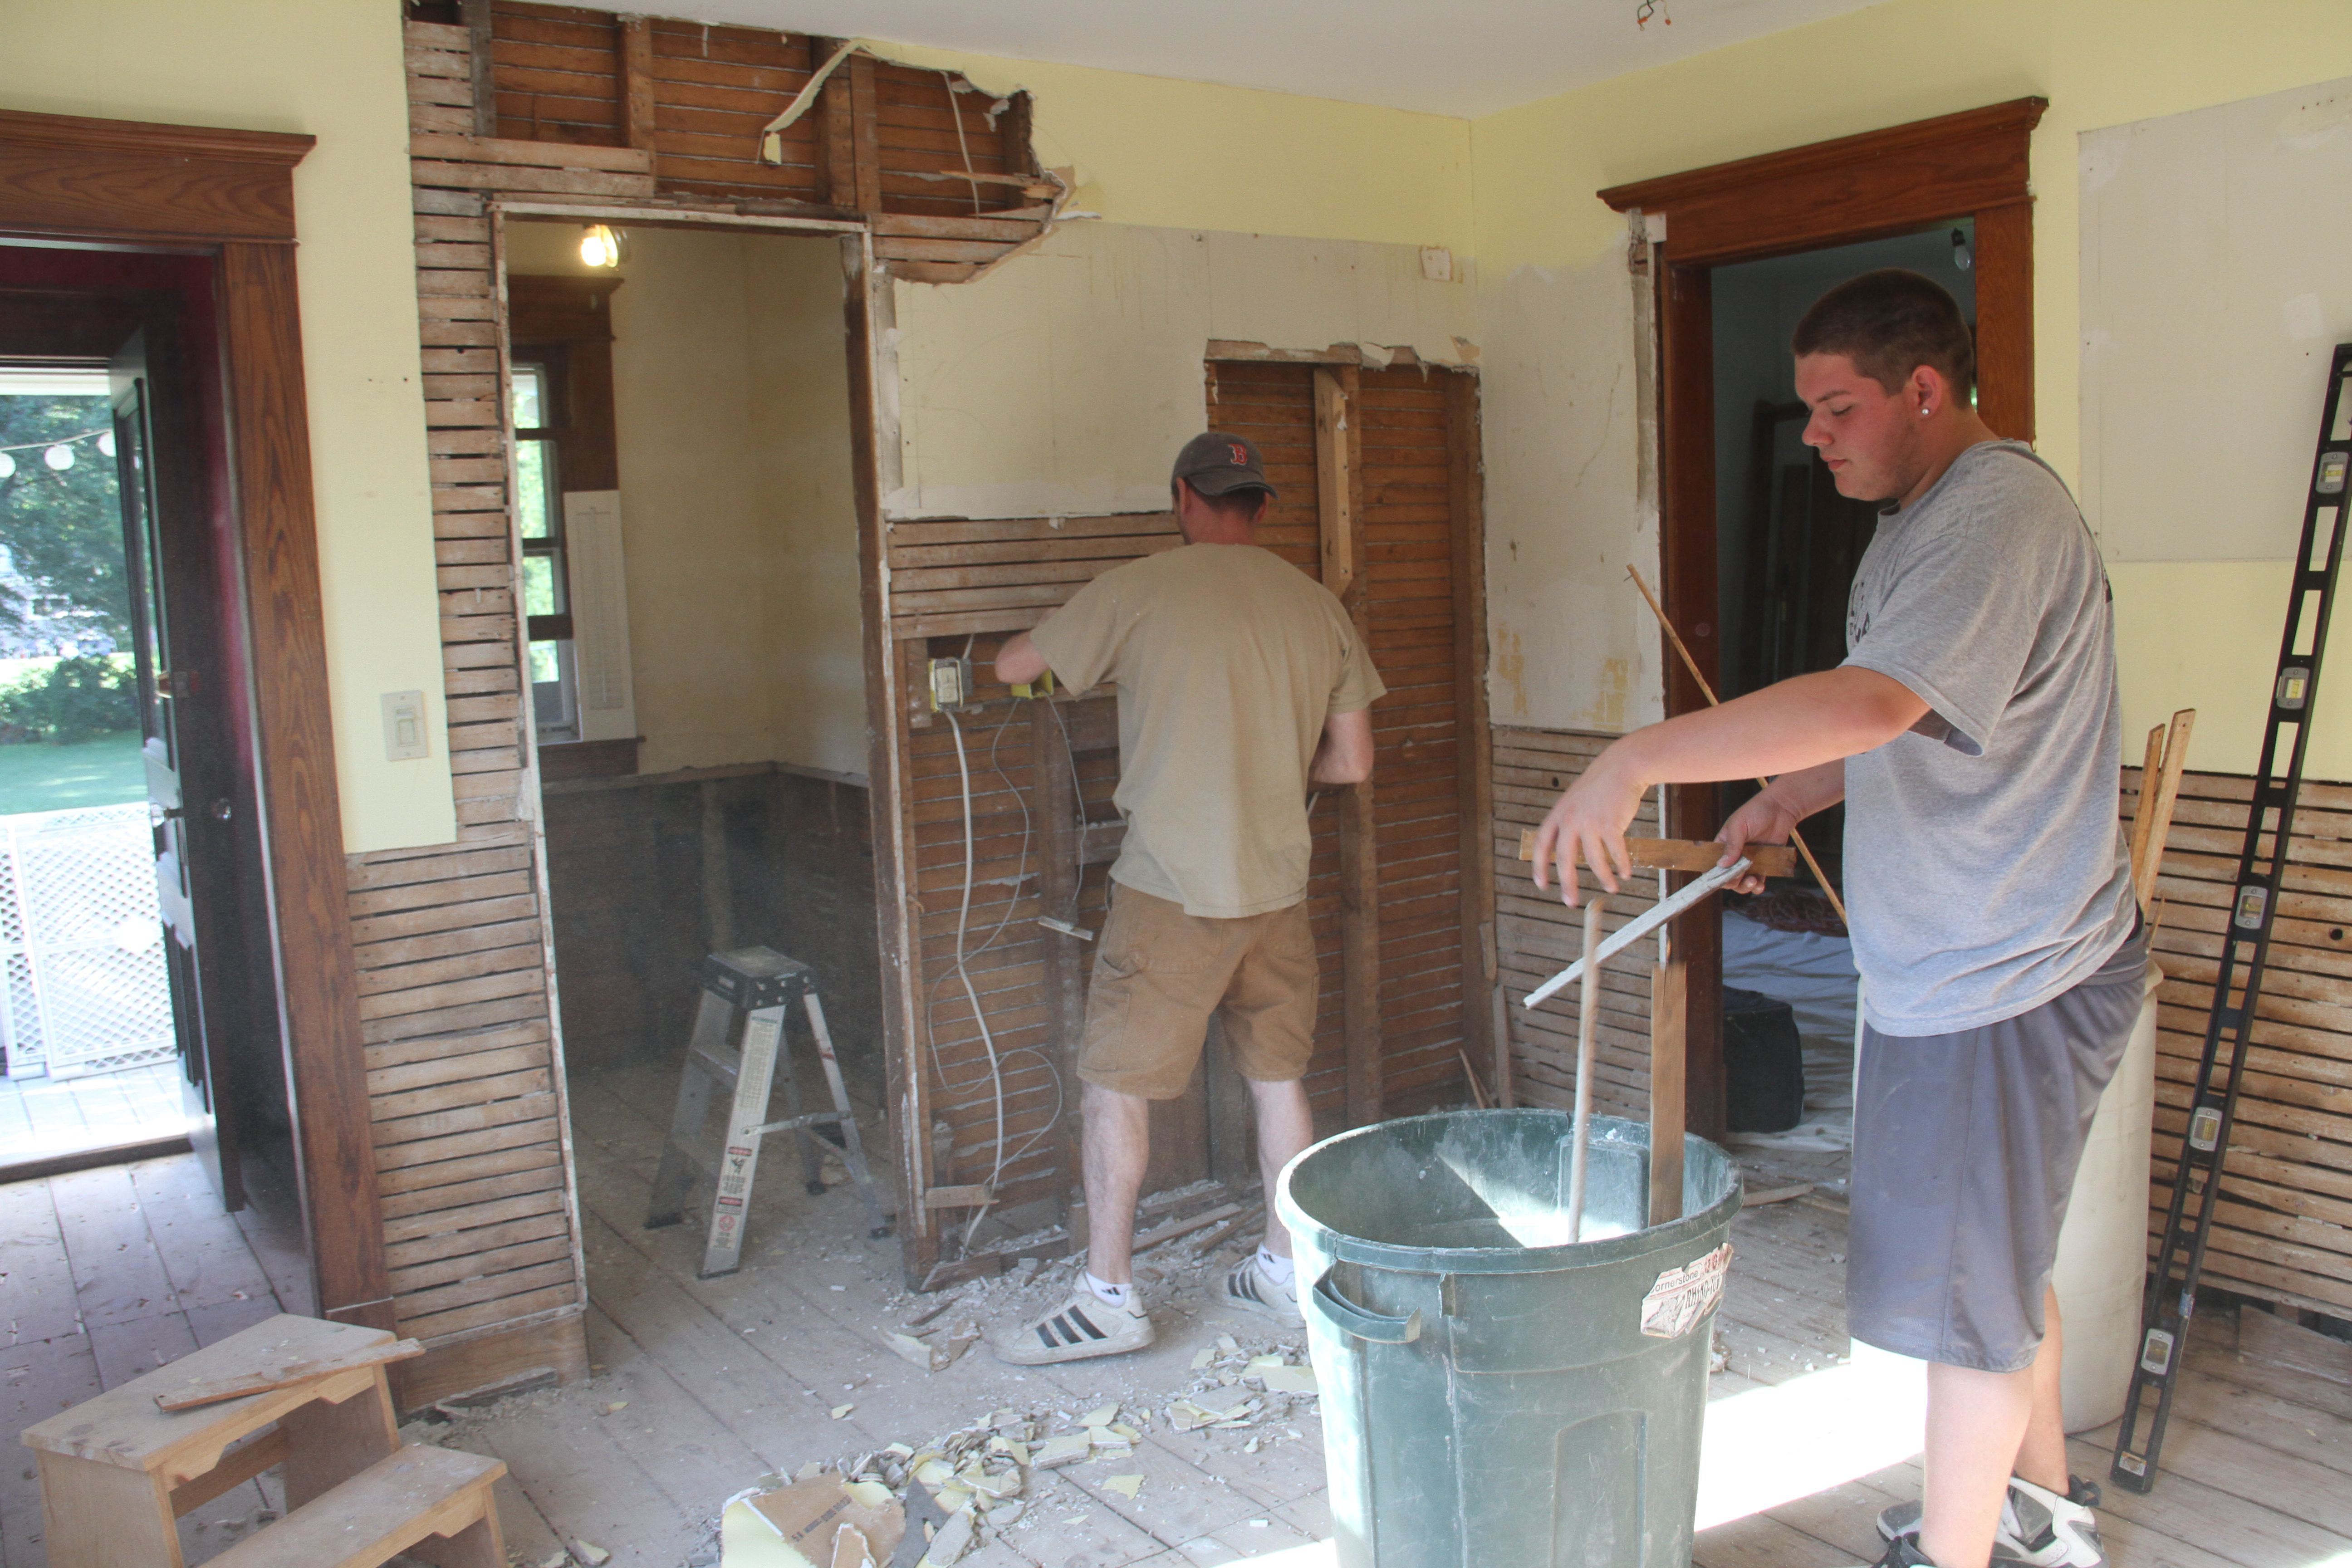 Of course opening up that doorway meant demo-ing the rest of that plaster and lathe on that wall, too.